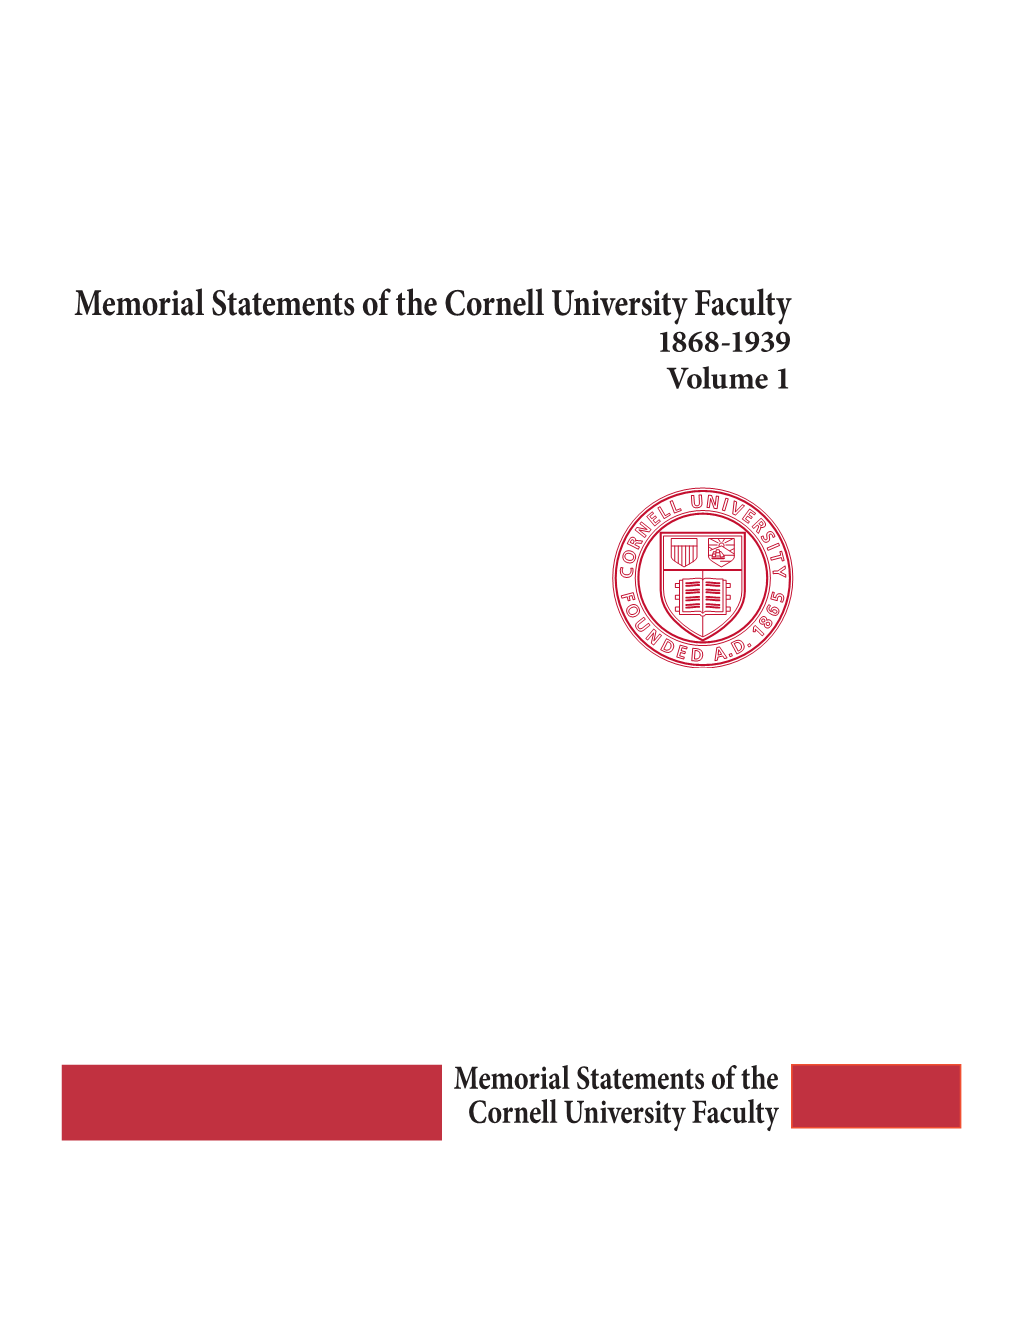 Memorial Statements of the Cornell University Faculty 1868-1939 Volume 1